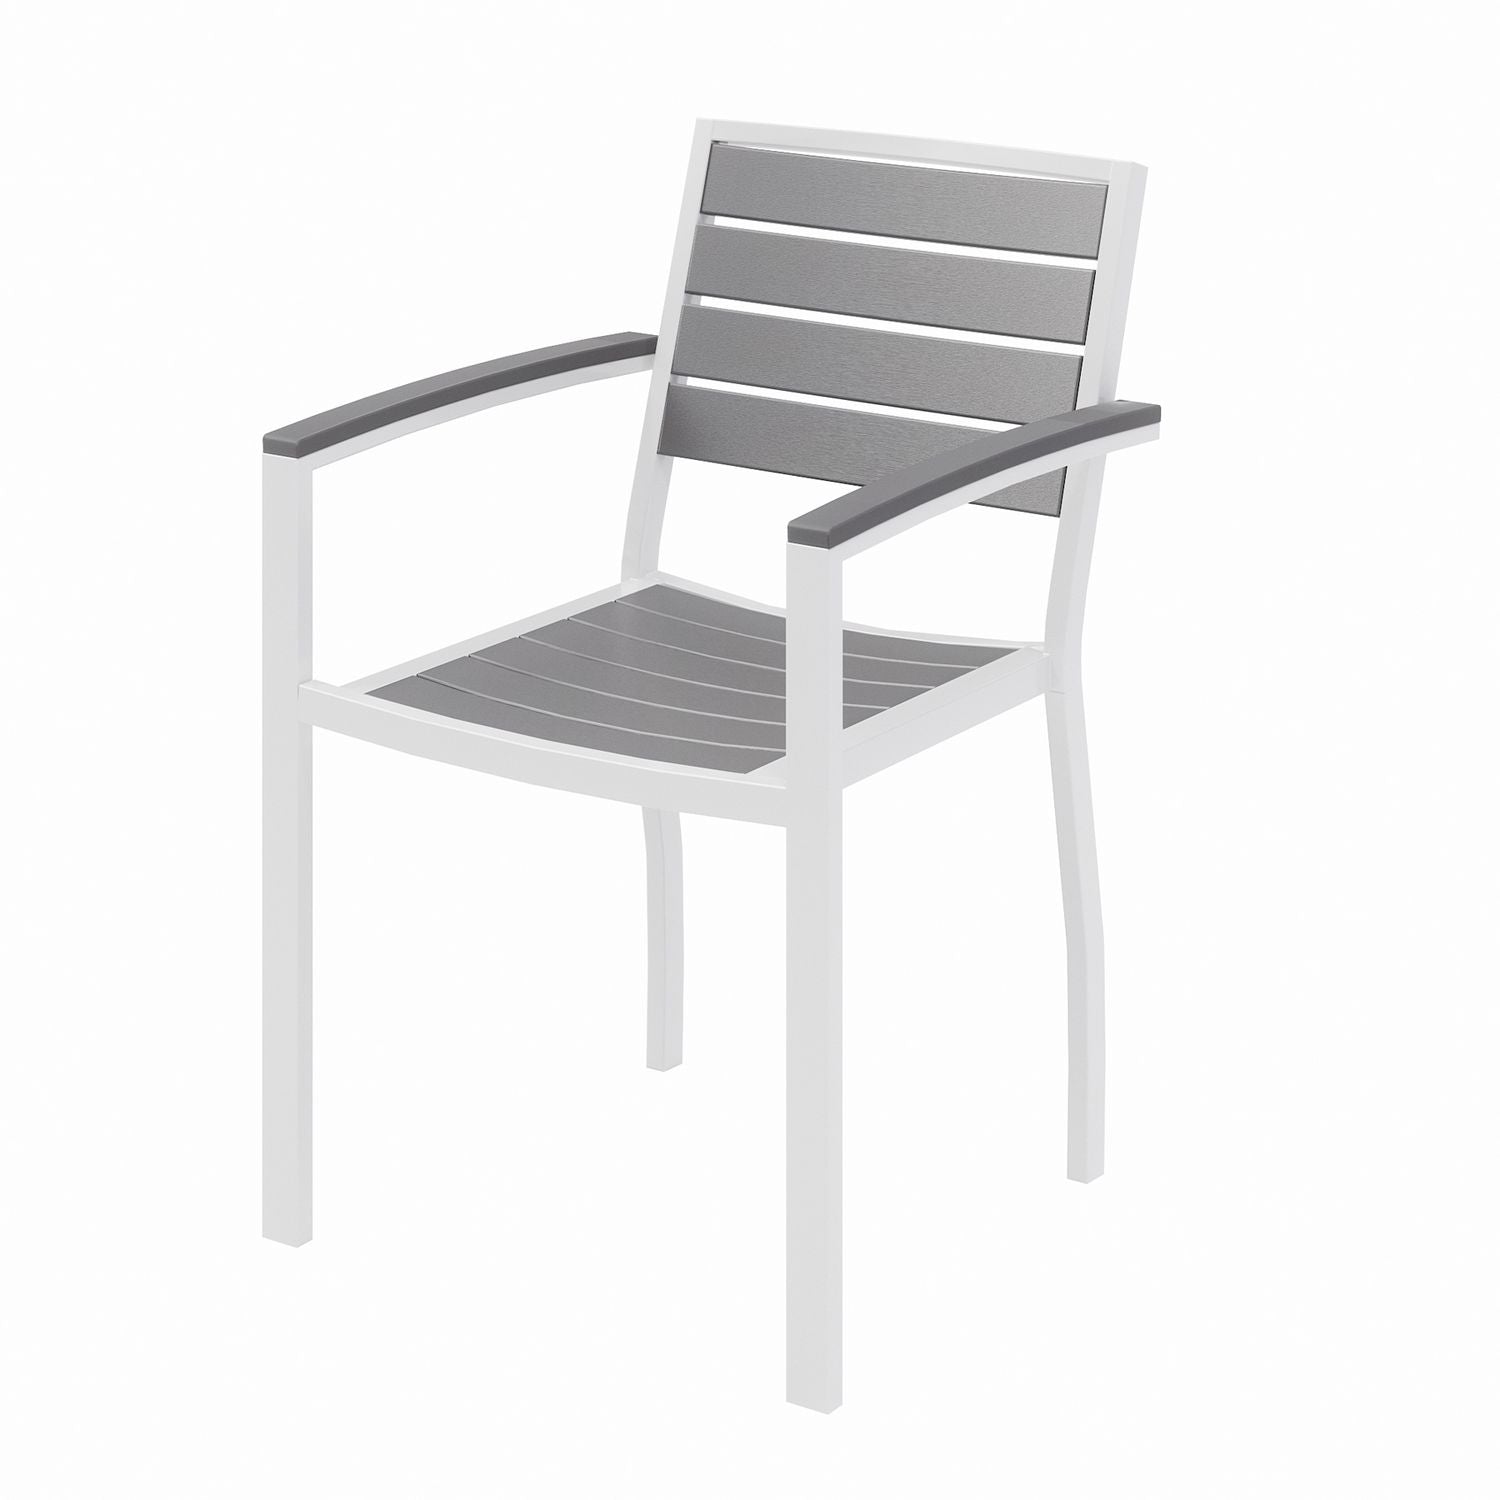 eveleen-outdoor-patio-table-with-six-gray-powder-coated-polymer-chairs-32-x-55-x-29-gray-ships-in-4-6-business-days_kfi840031918536 - 3